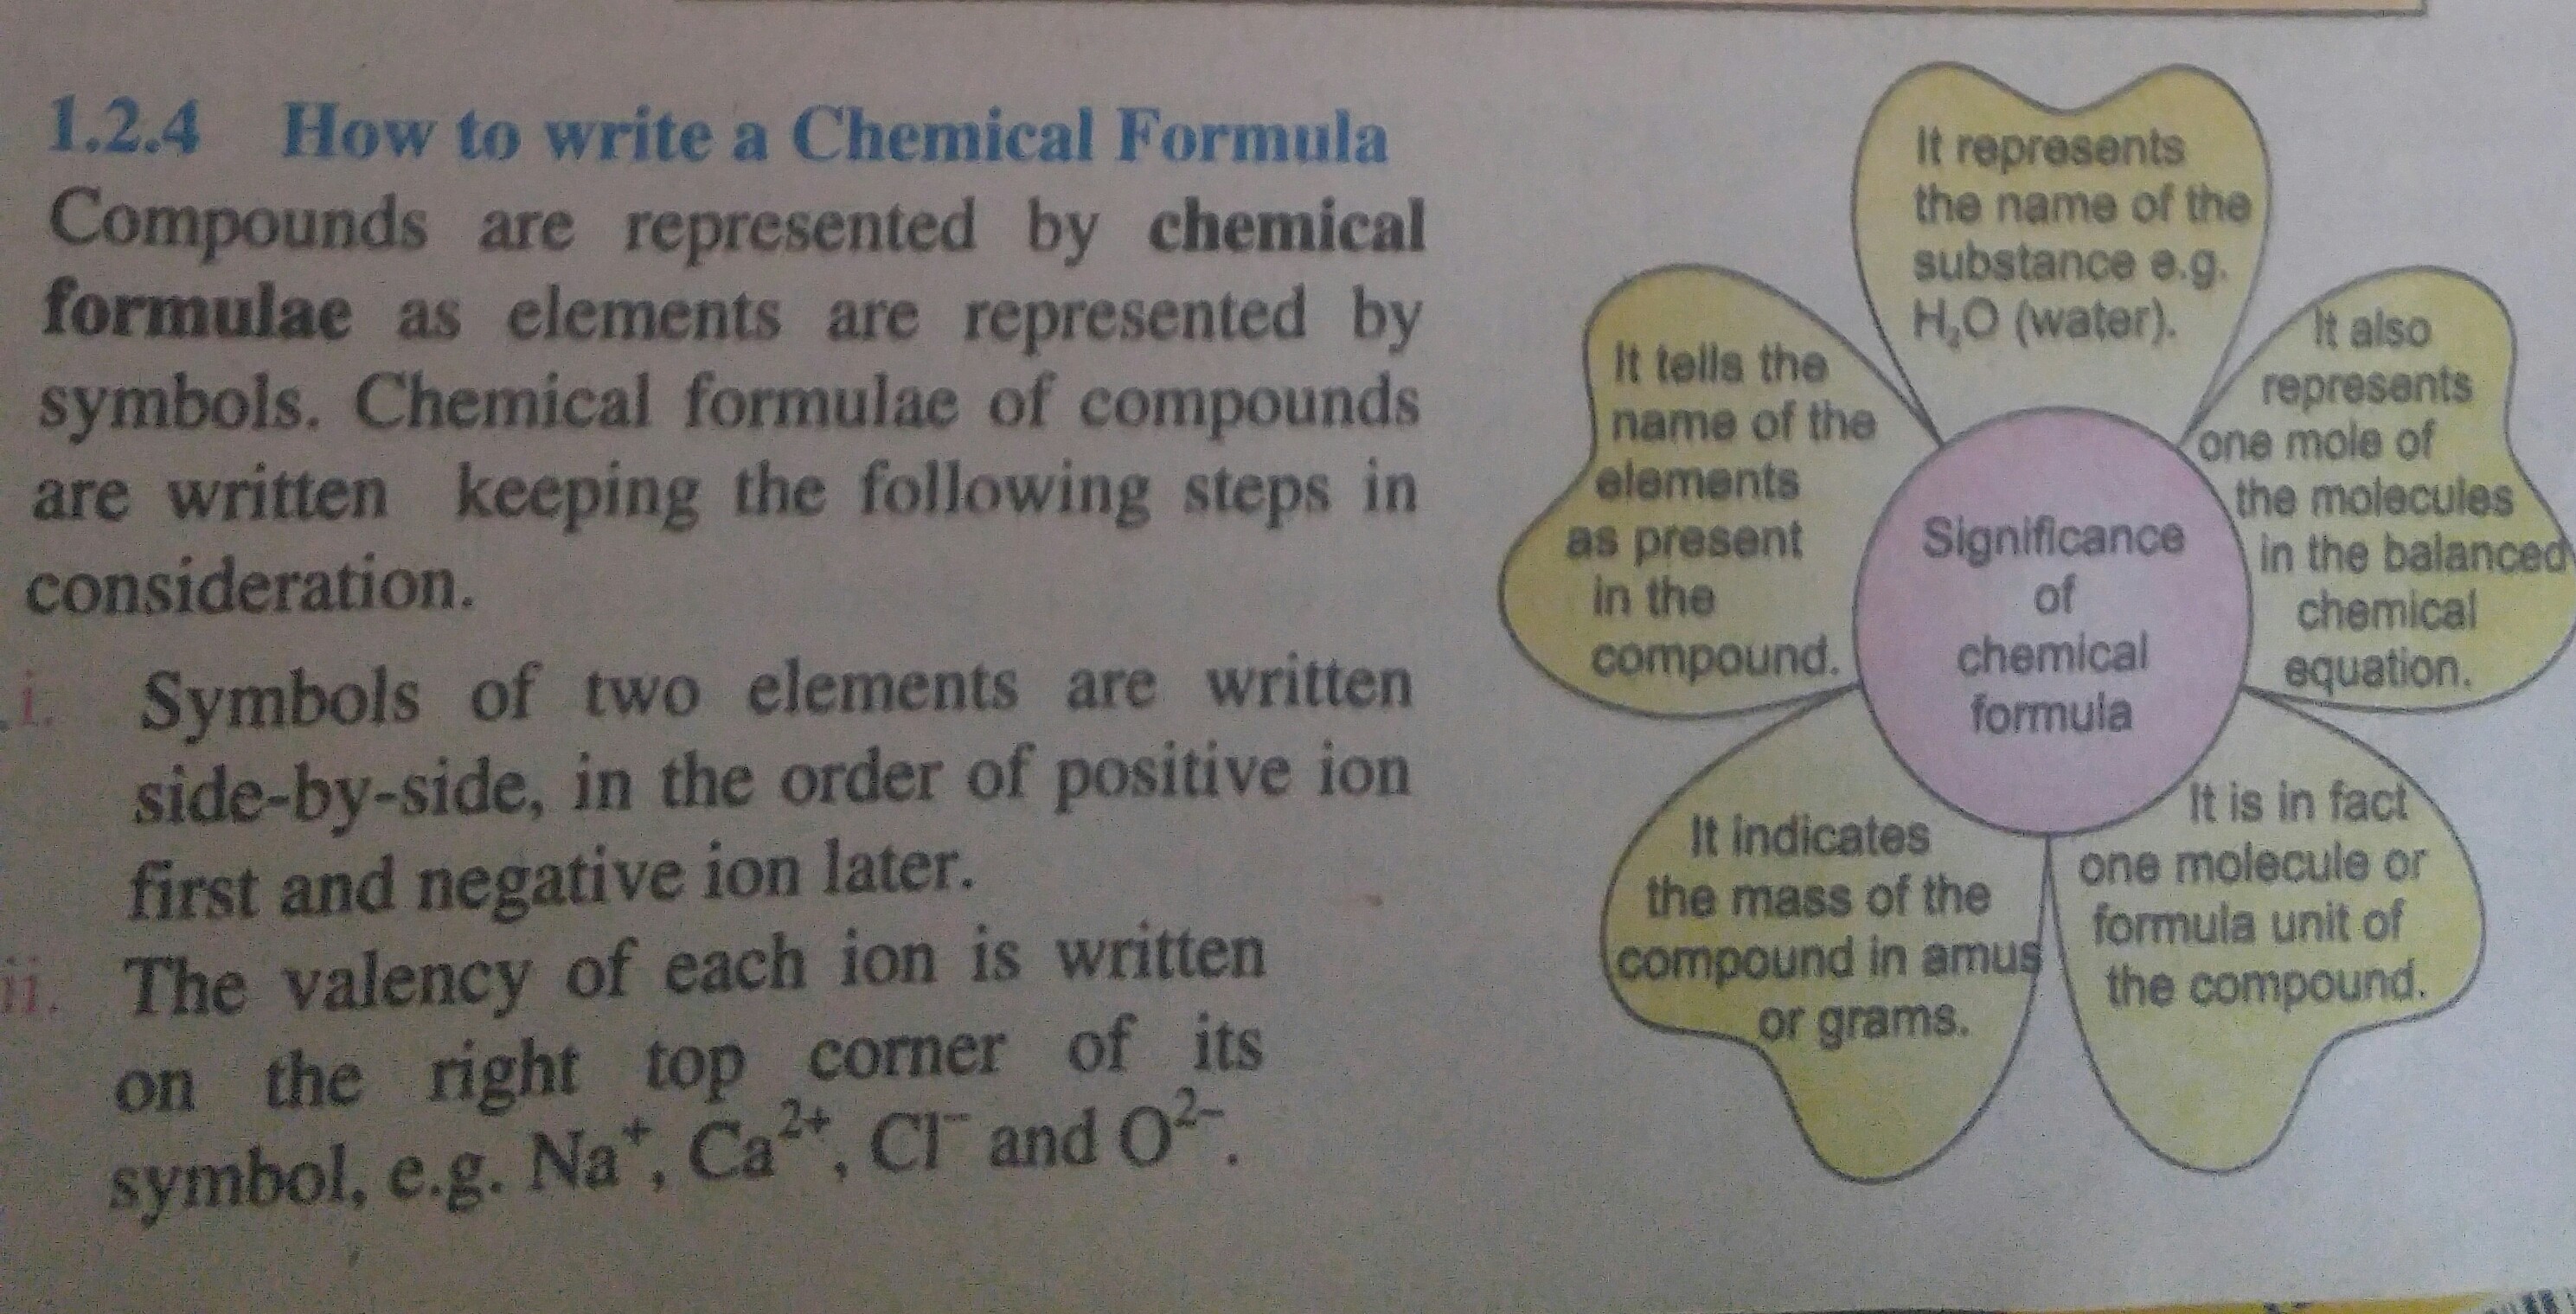 How to write a chemical formula & significance of chemical formula